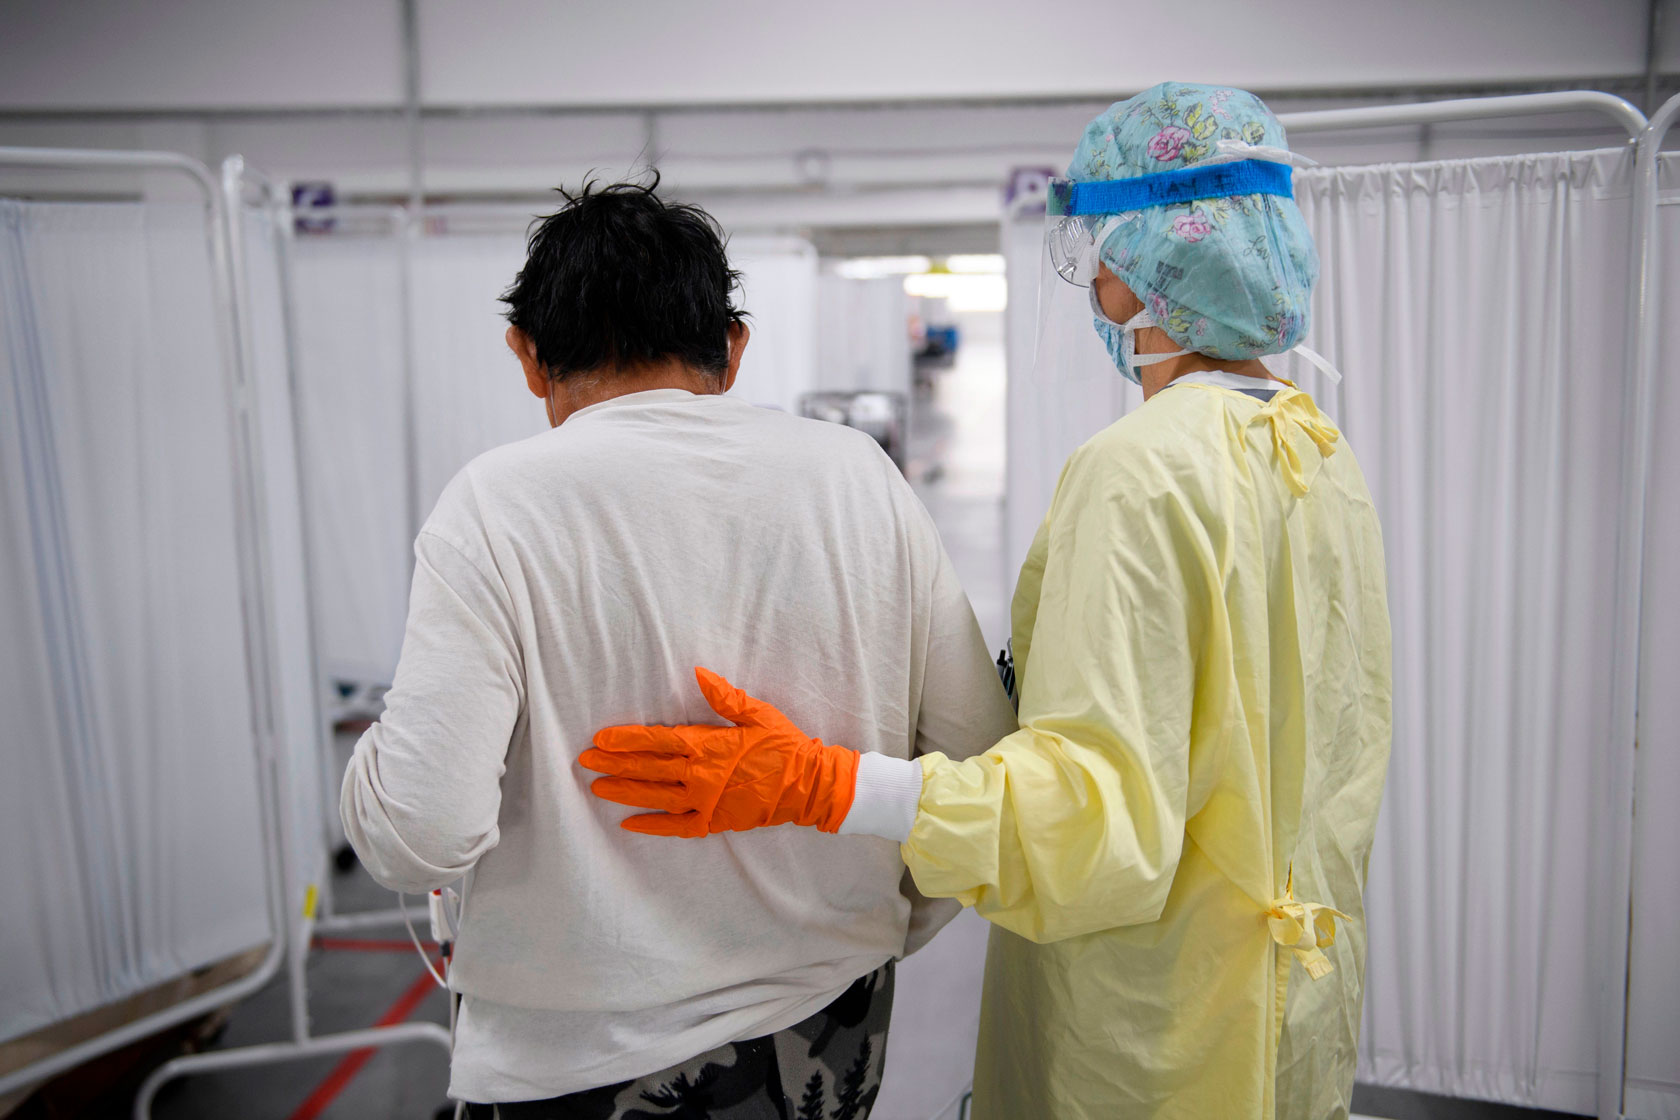 Photo shows a nurse walking with a patient.